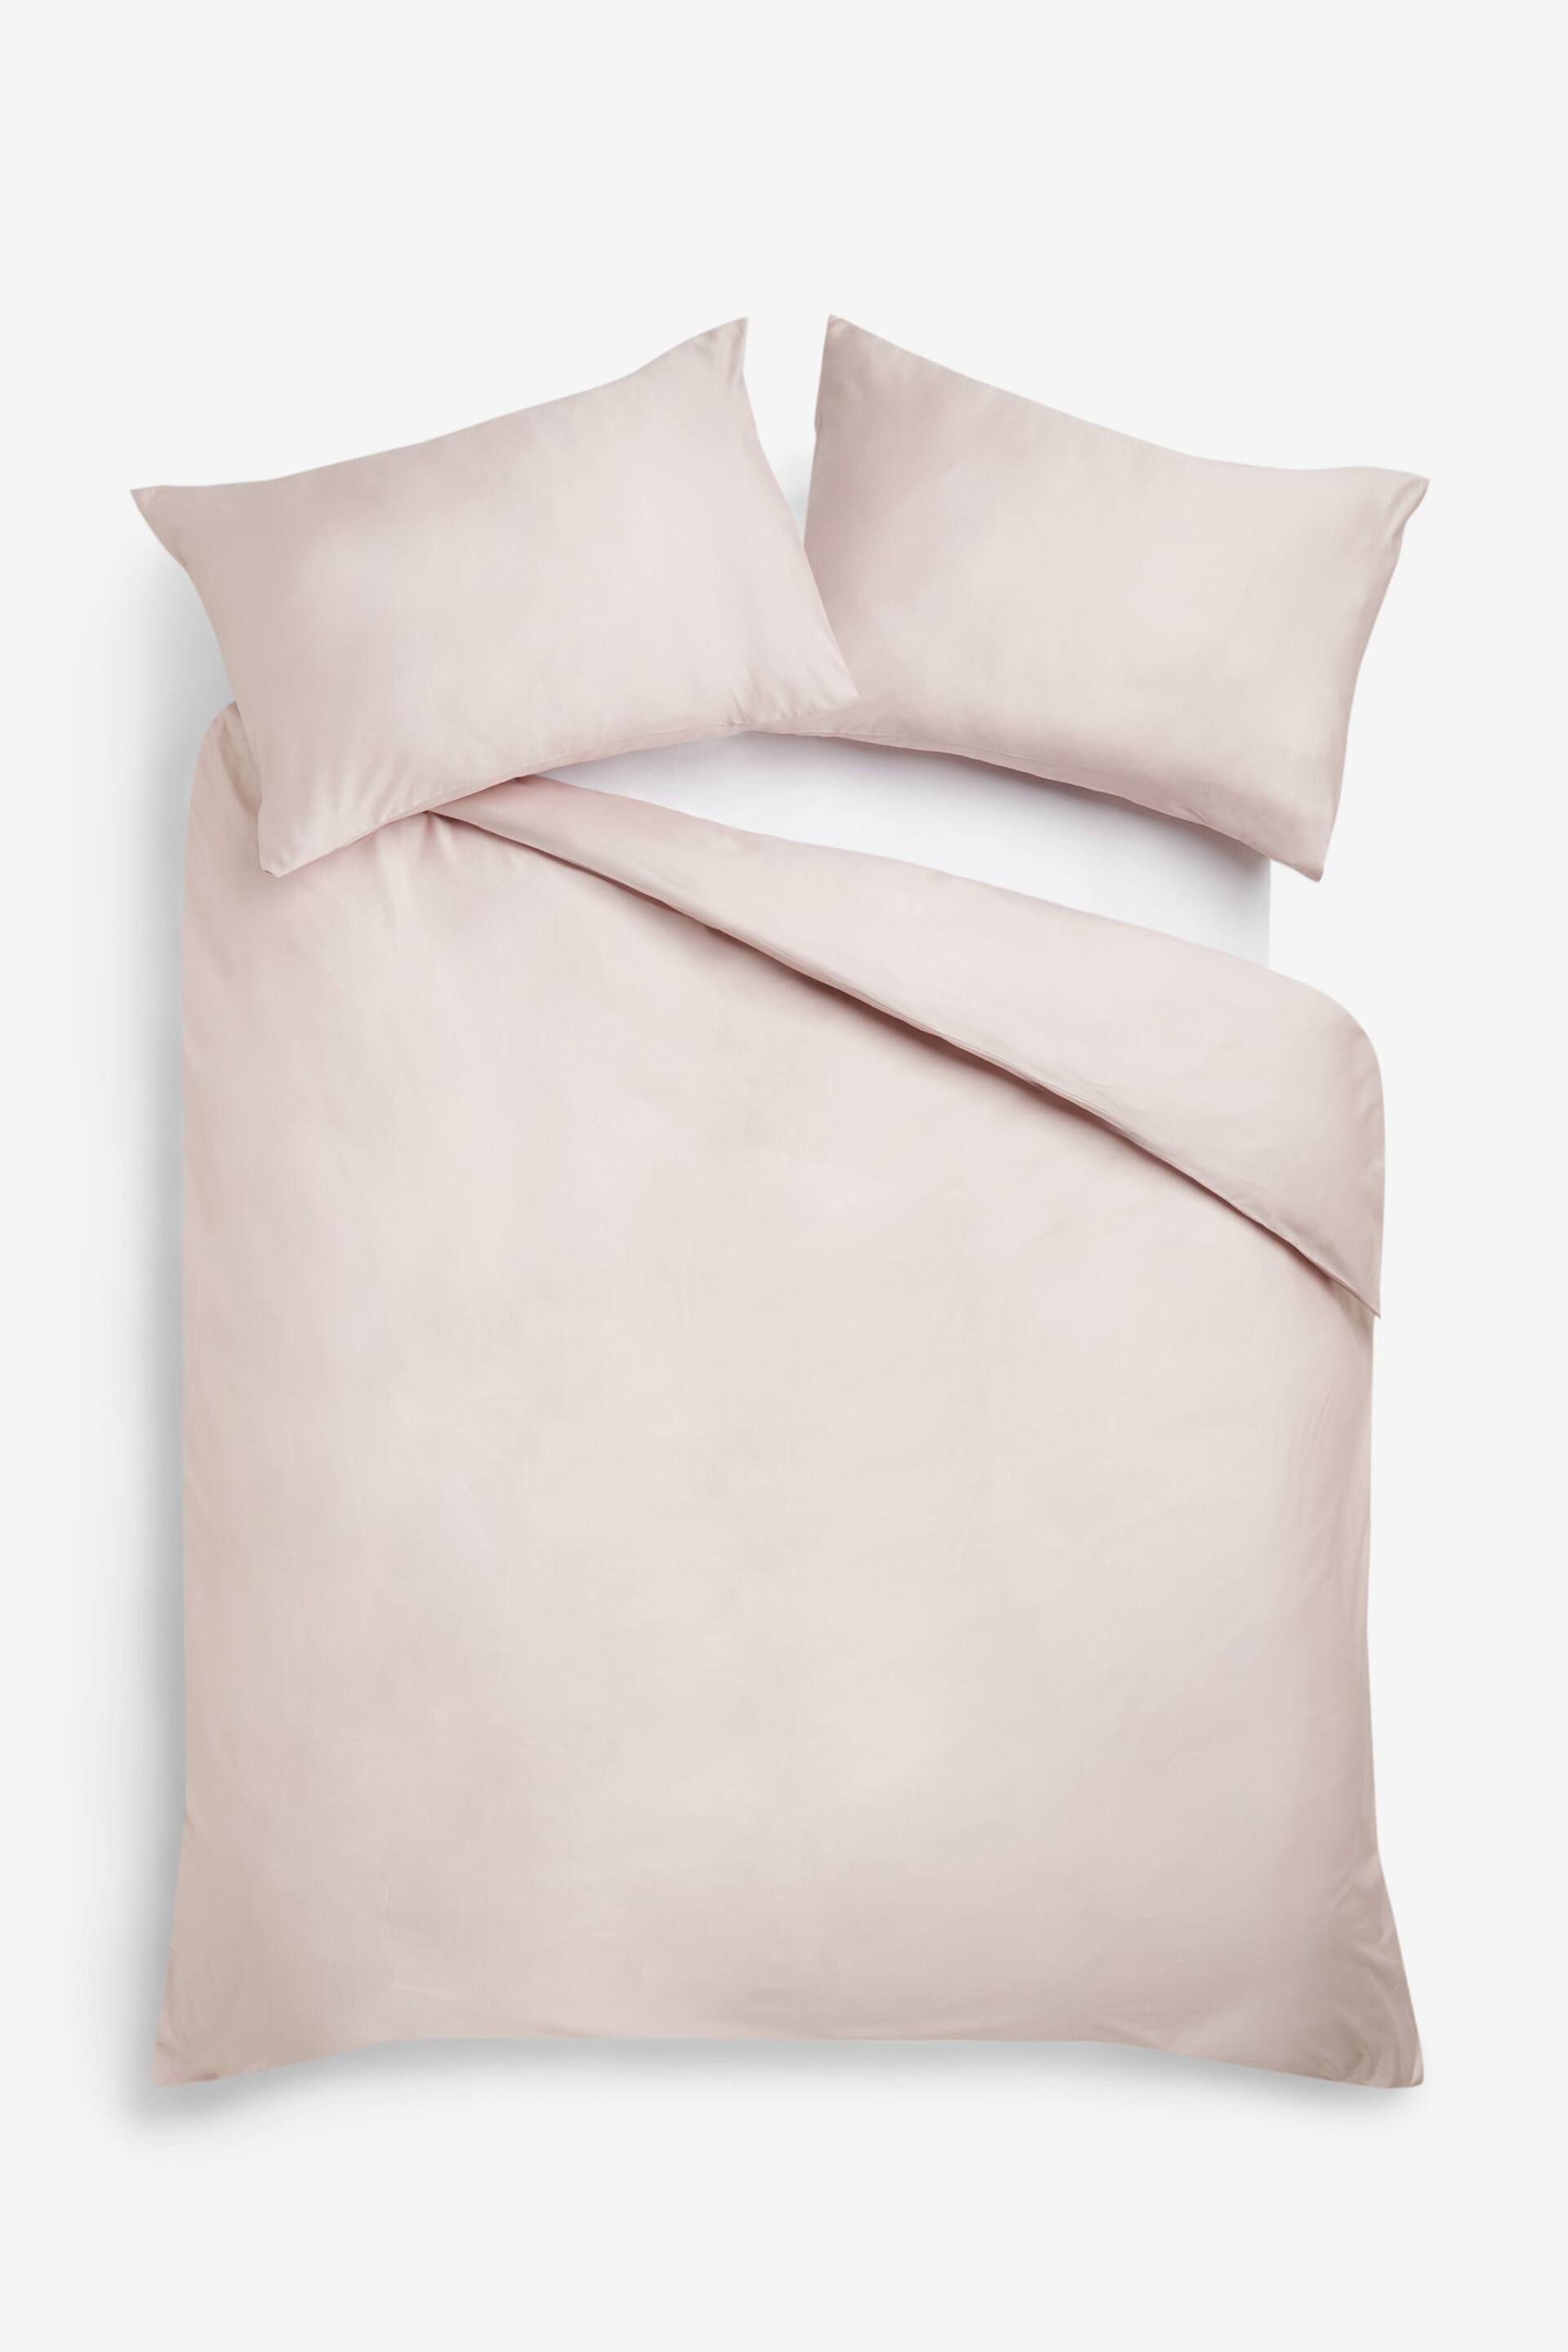 Set of 2 Blush Pink Collection Luxe 400 Thread Count 100% Egyptian Cotton Pillowcases - Image 2 of 3